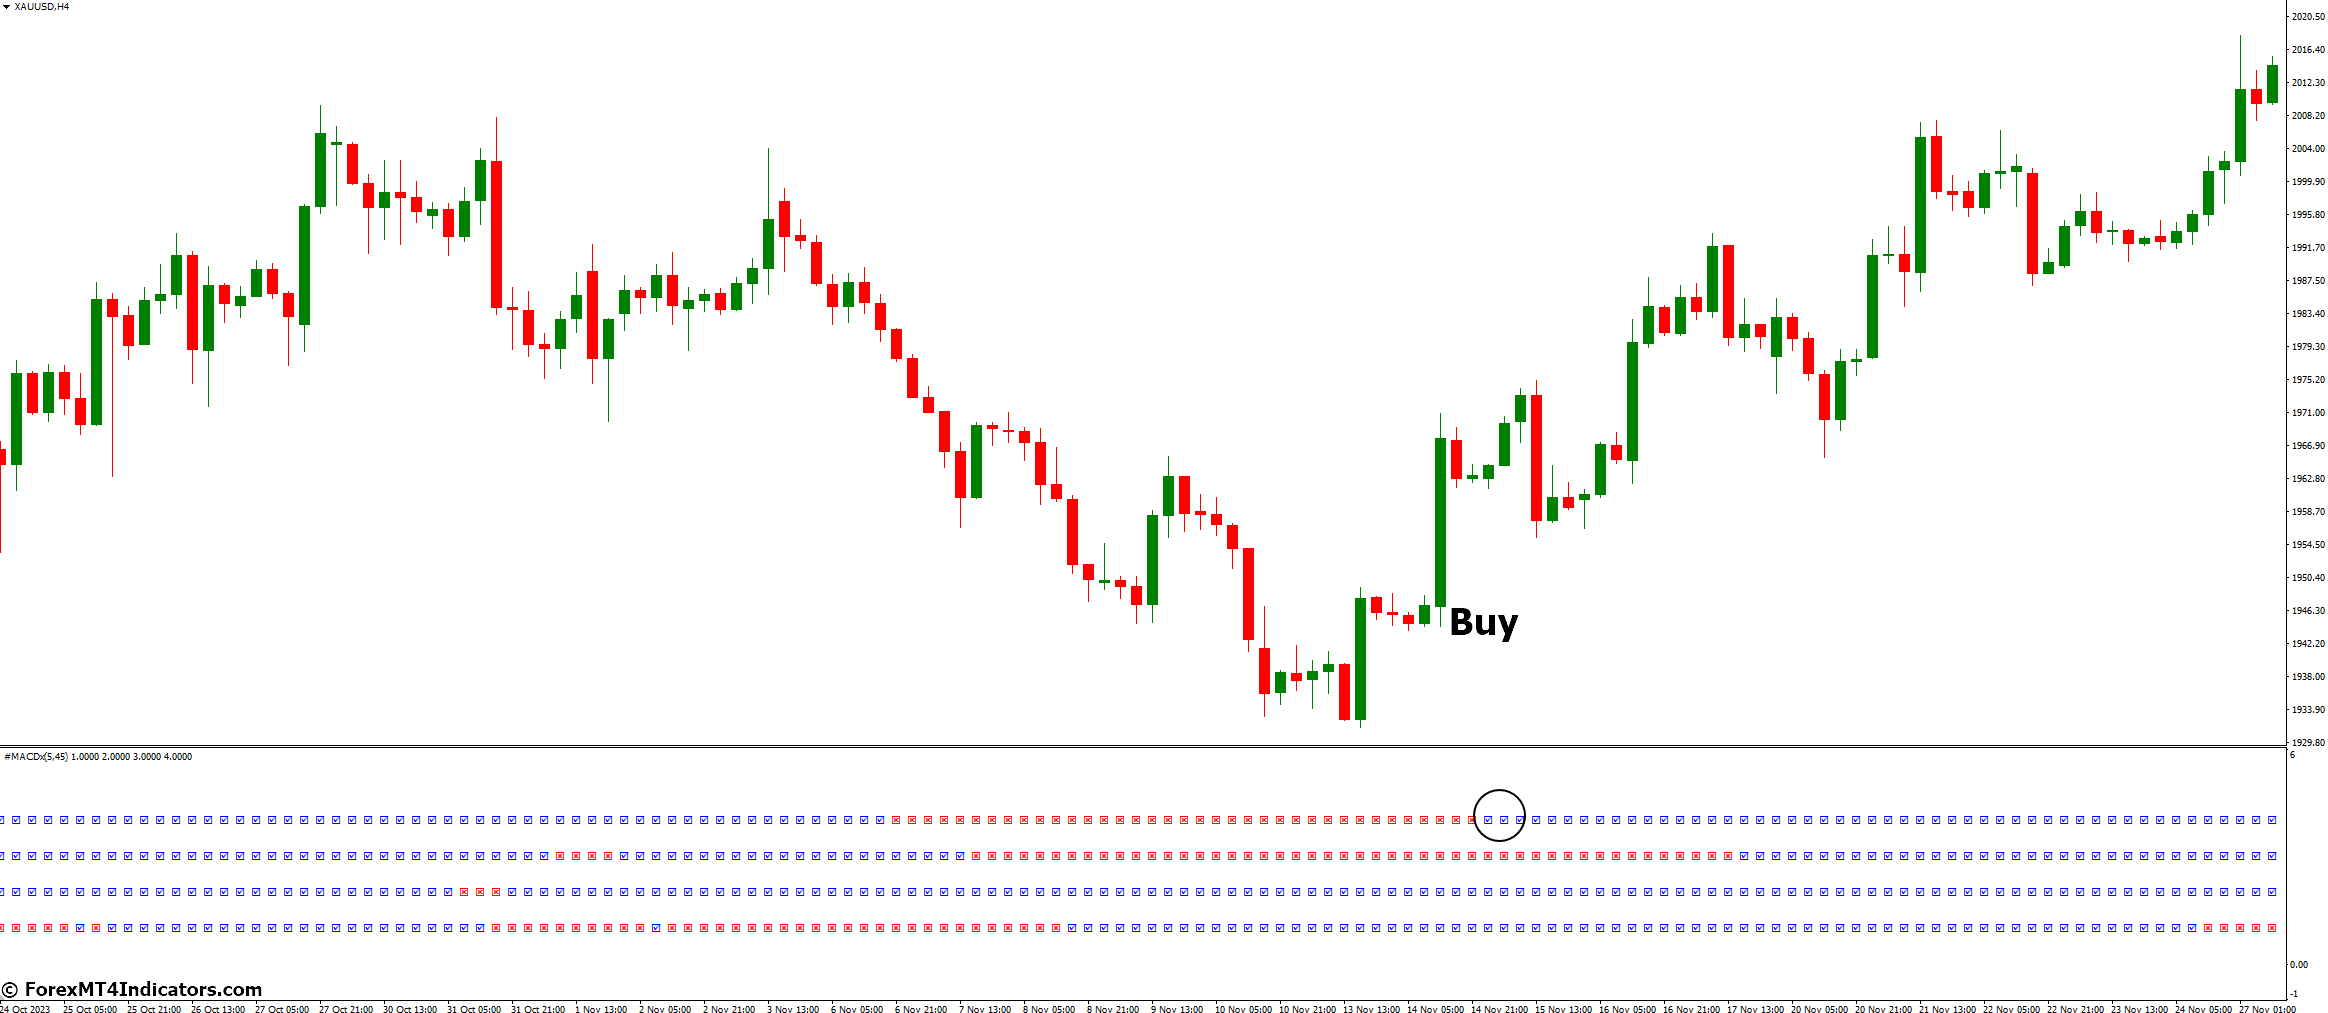 How to Trade with MTF Macd X Indicator - Buy Entry